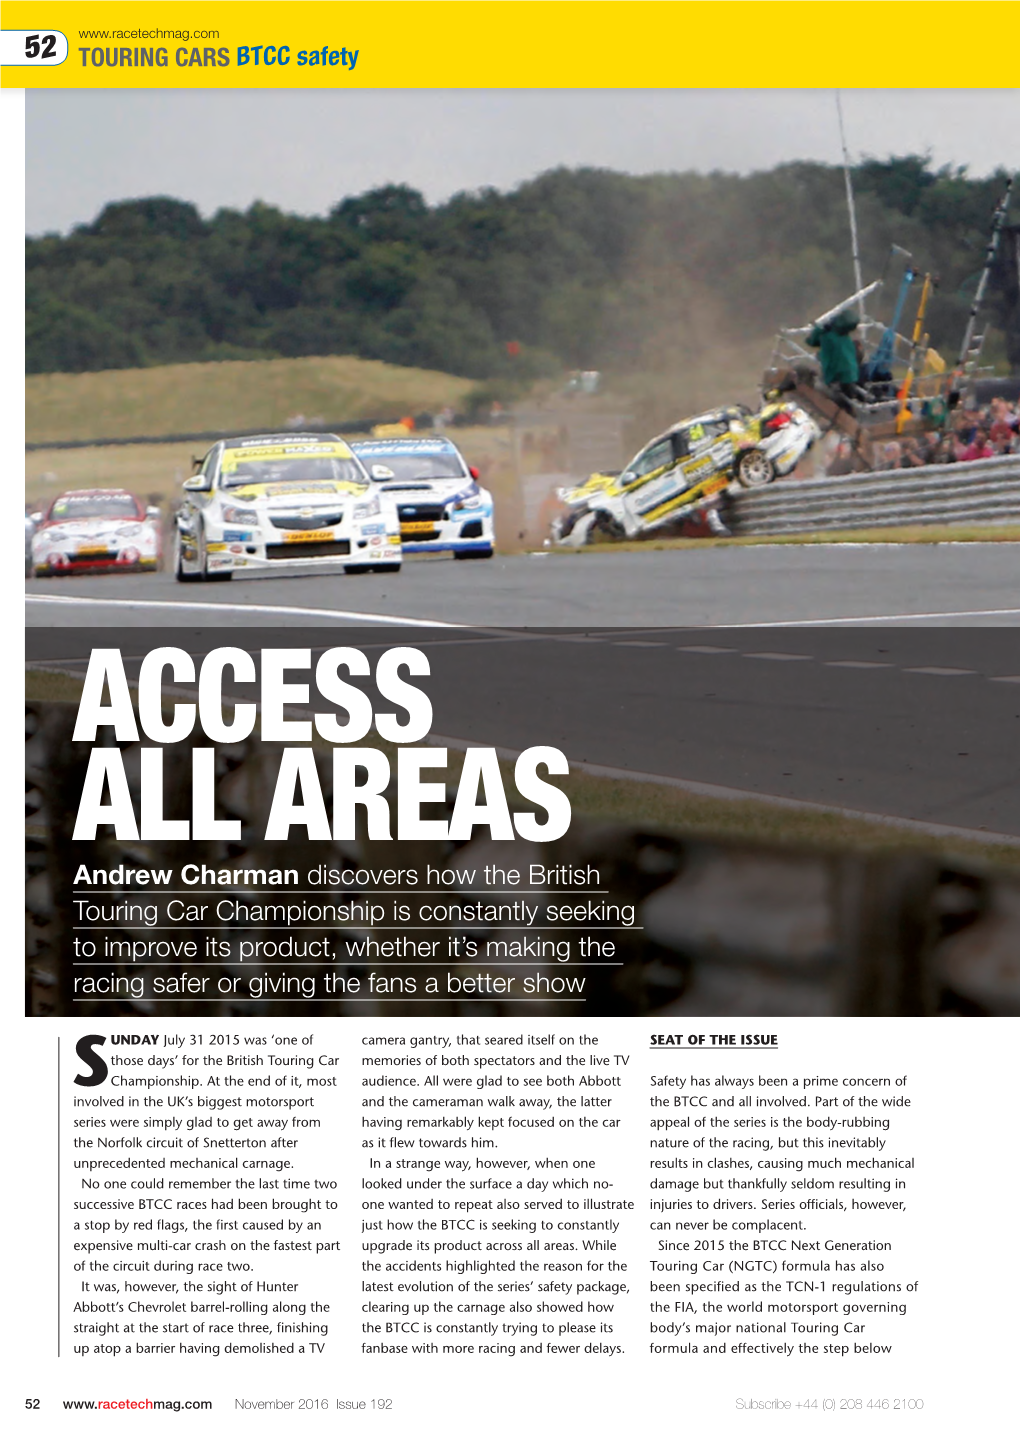 Andrew Charman Discovers How the British Touring Car Championship